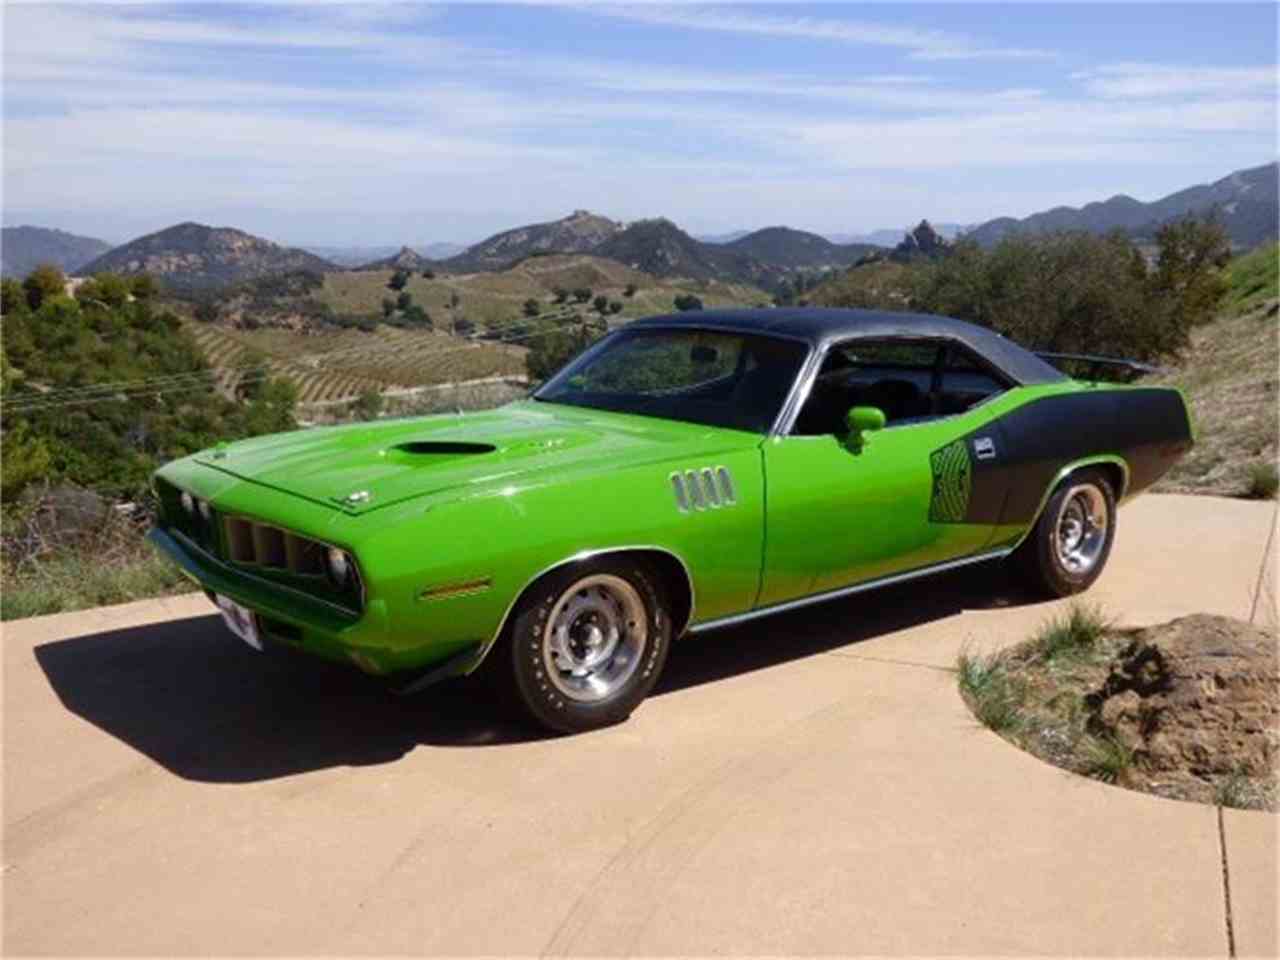 Amazing 1971 Plymouth Barracuda Pictures & Backgrounds